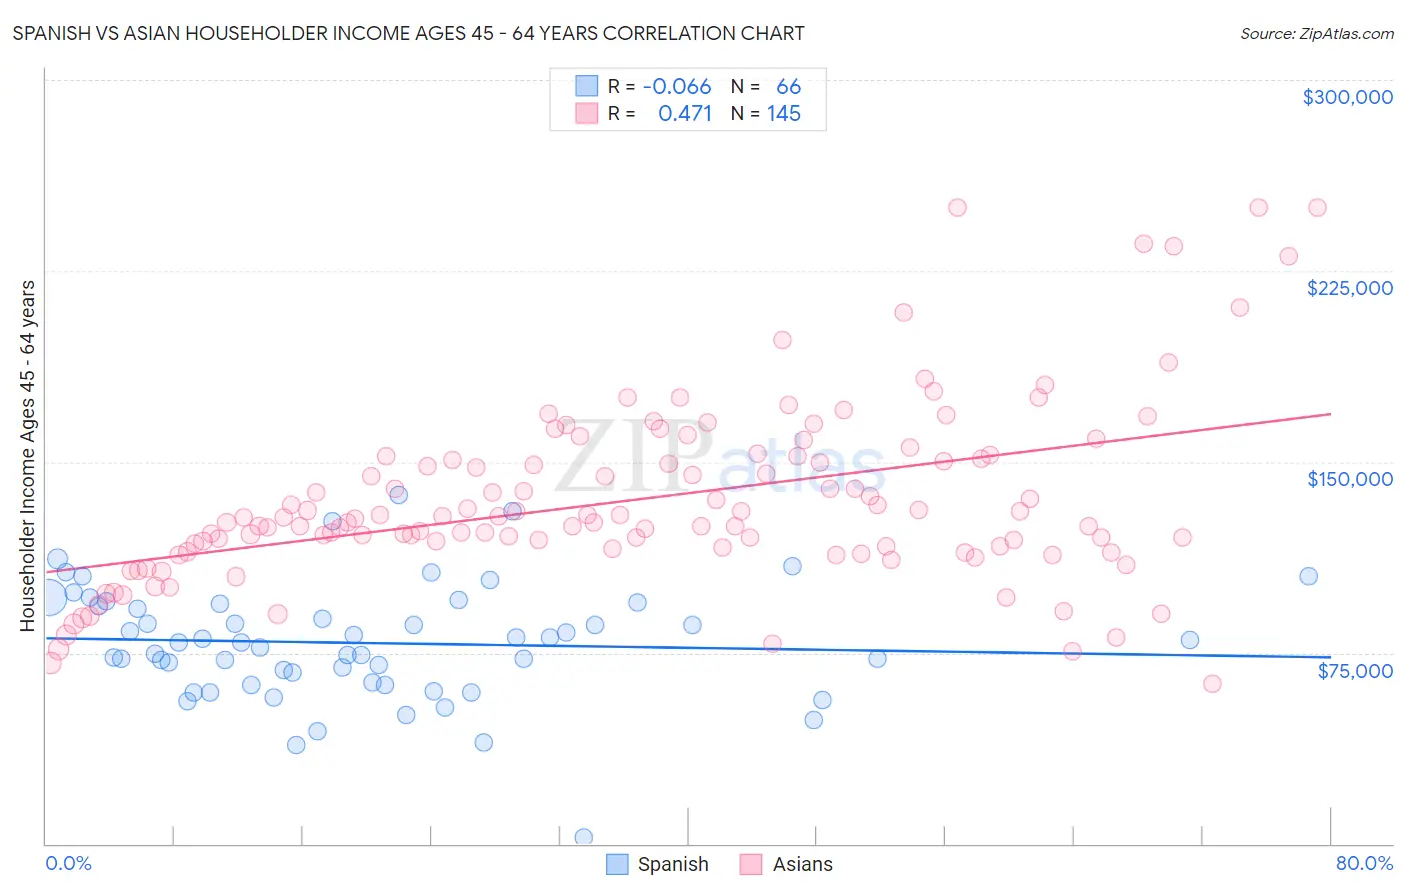 Spanish vs Asian Householder Income Ages 45 - 64 years